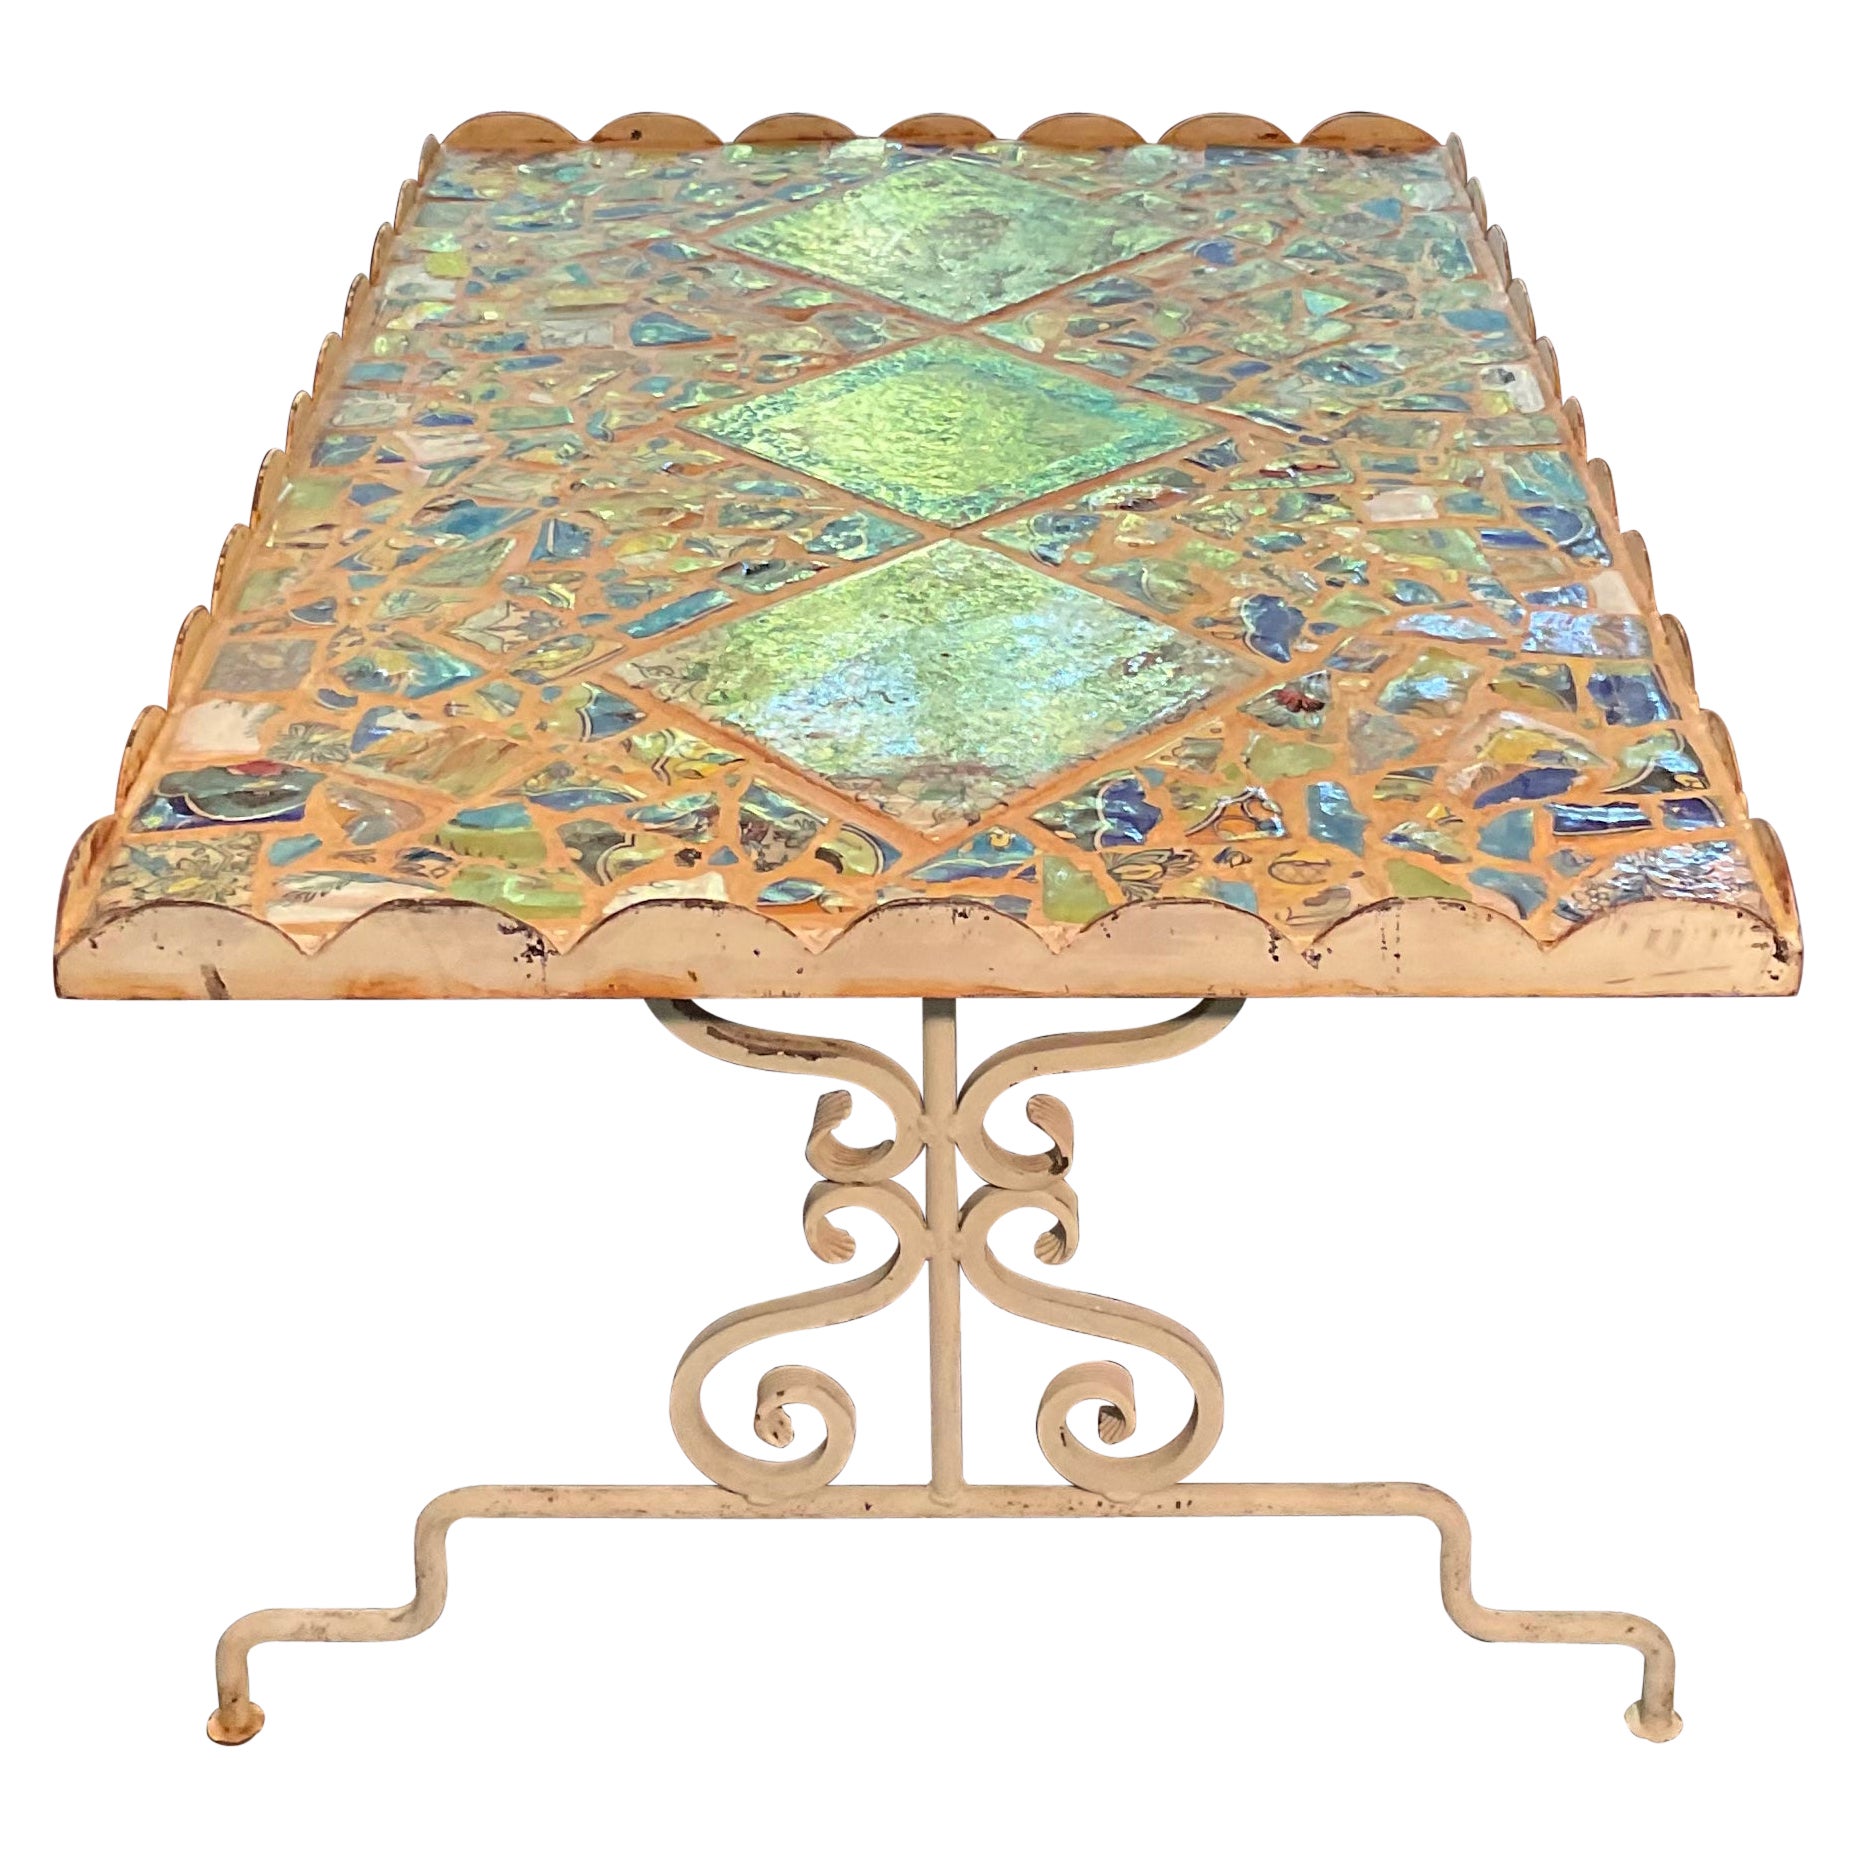 One of a Kind Iron Persian Tile Coffee Table, by Joseph Malekan